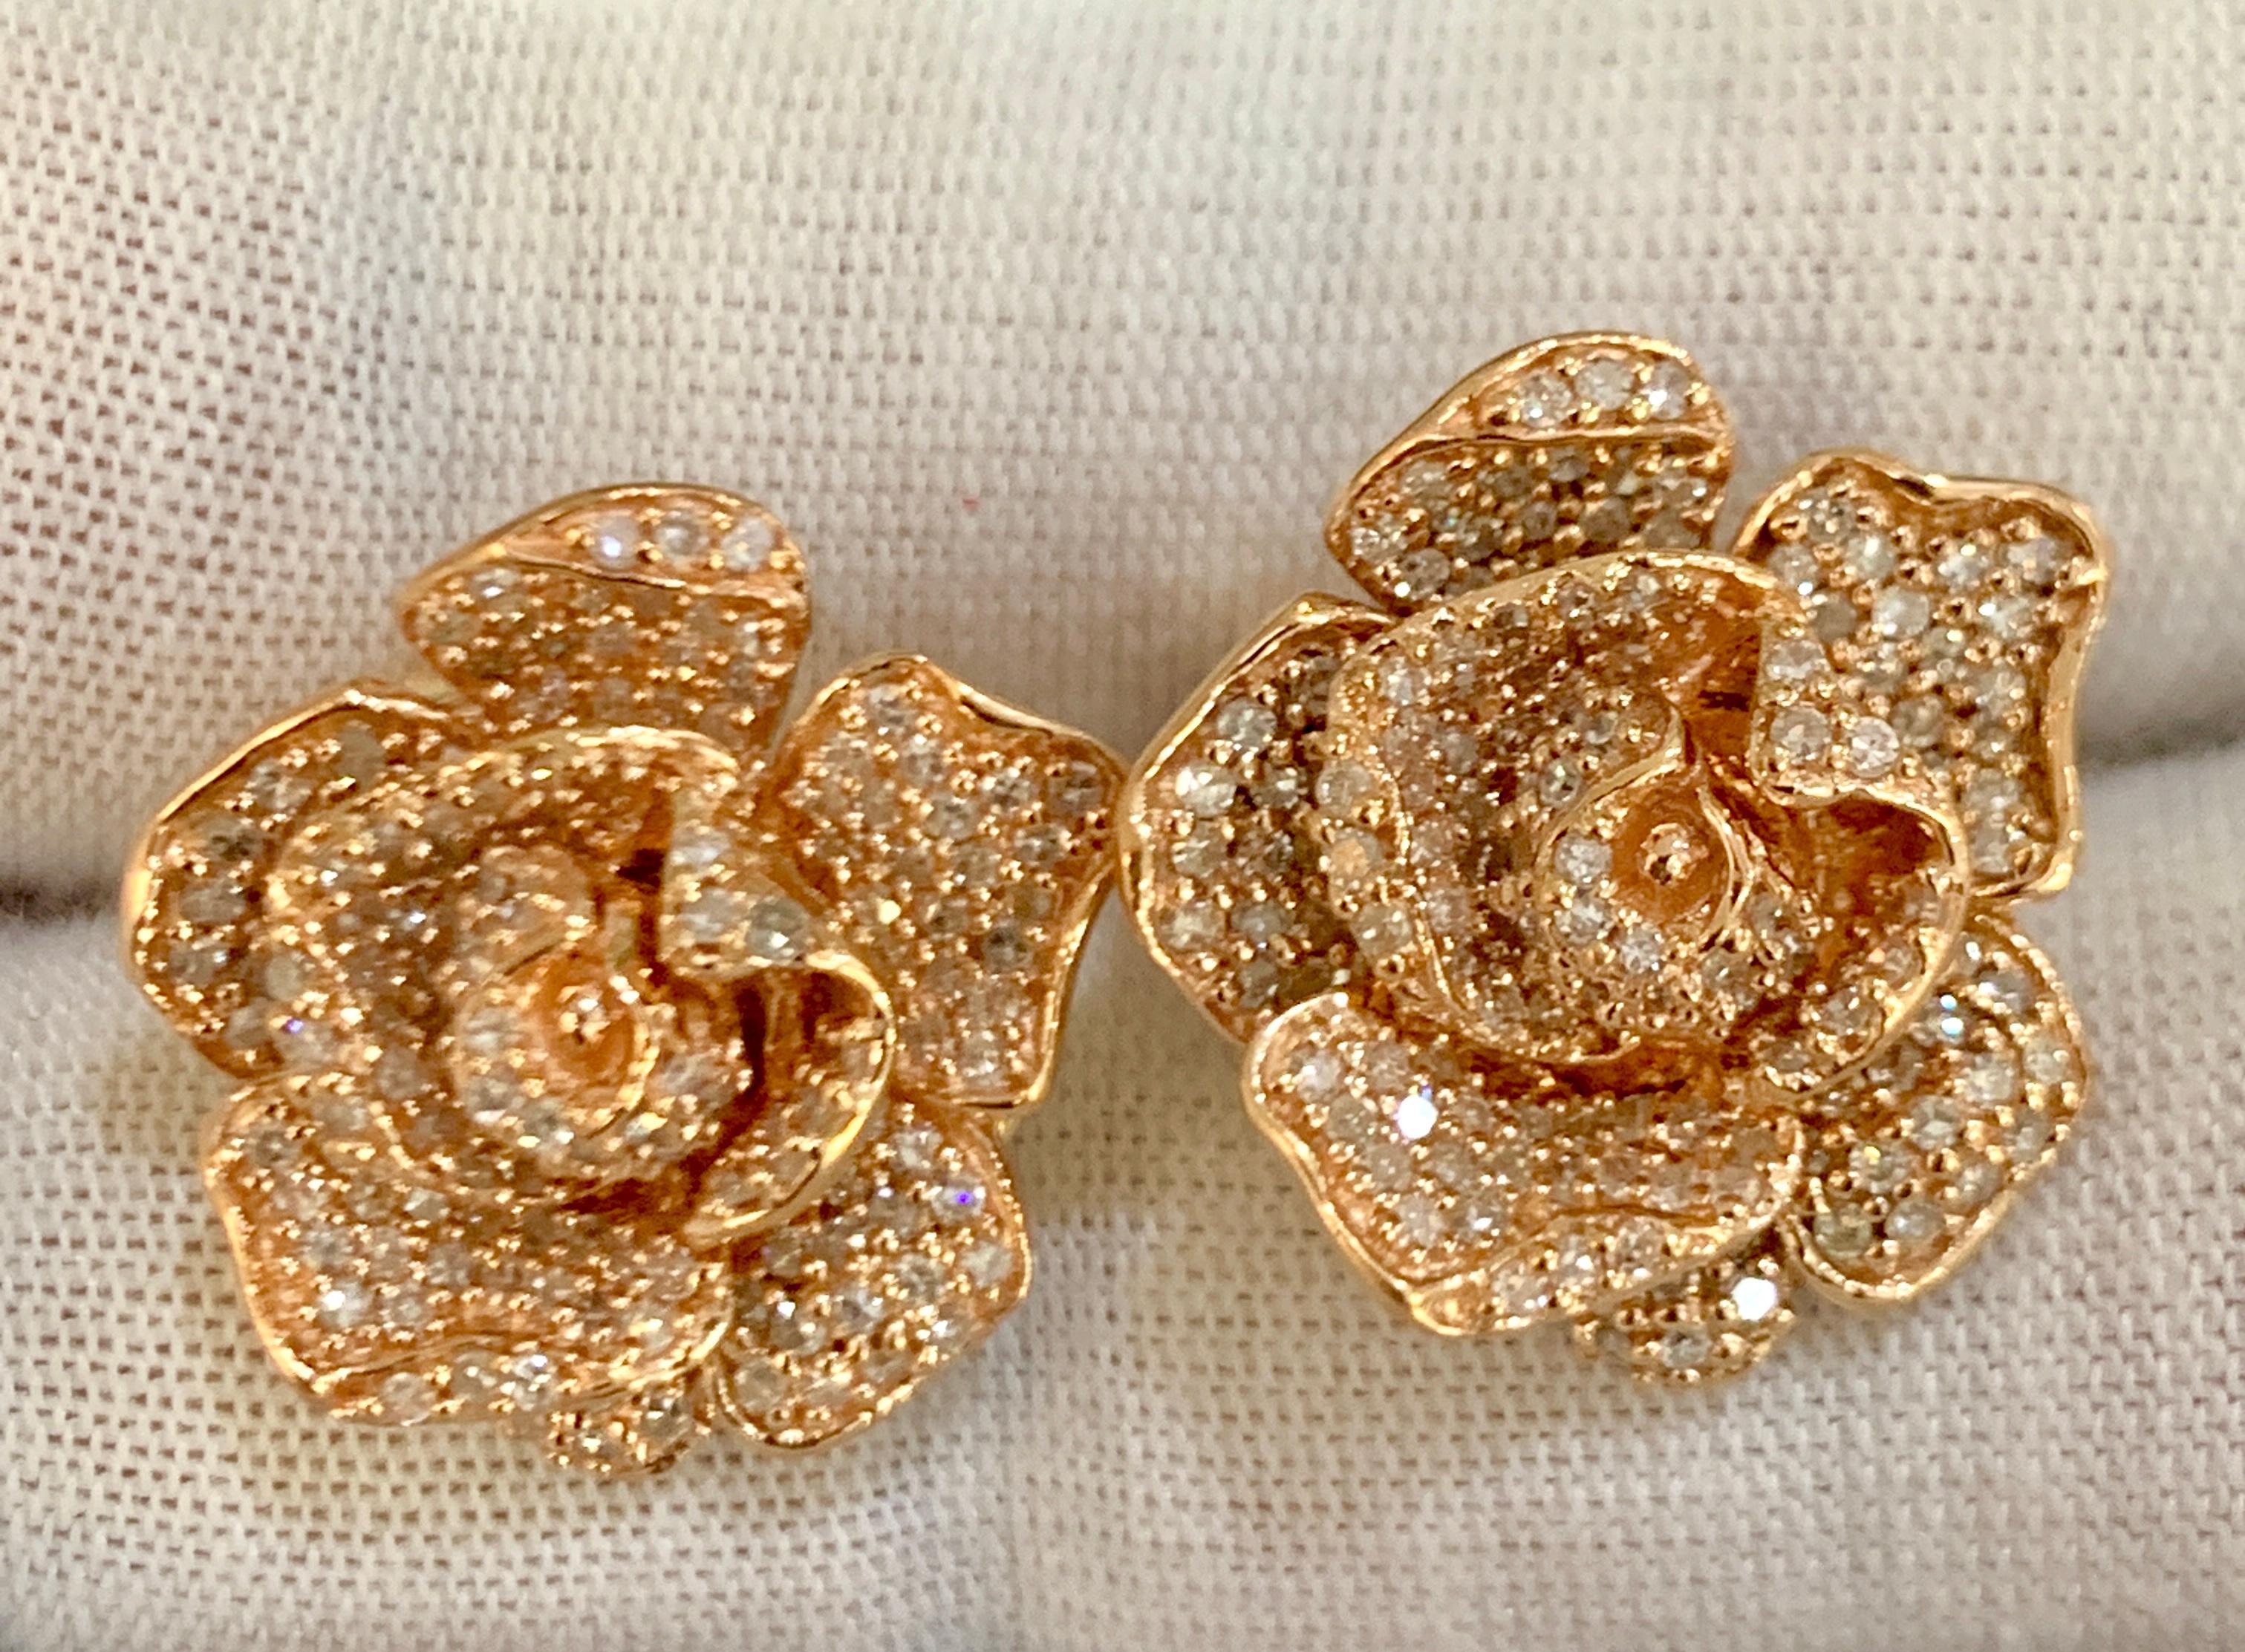 
Designer Effy's Diamond Rose Flower Stud Omega back Earrings 14 Karat Rose Gold
Post with Omega back earring
This exquisite pair of earrings are beautifully crafted with 14 karat Rose gold .
Weight of 14 K gold 9.8  grams
292  pieces are 0.4